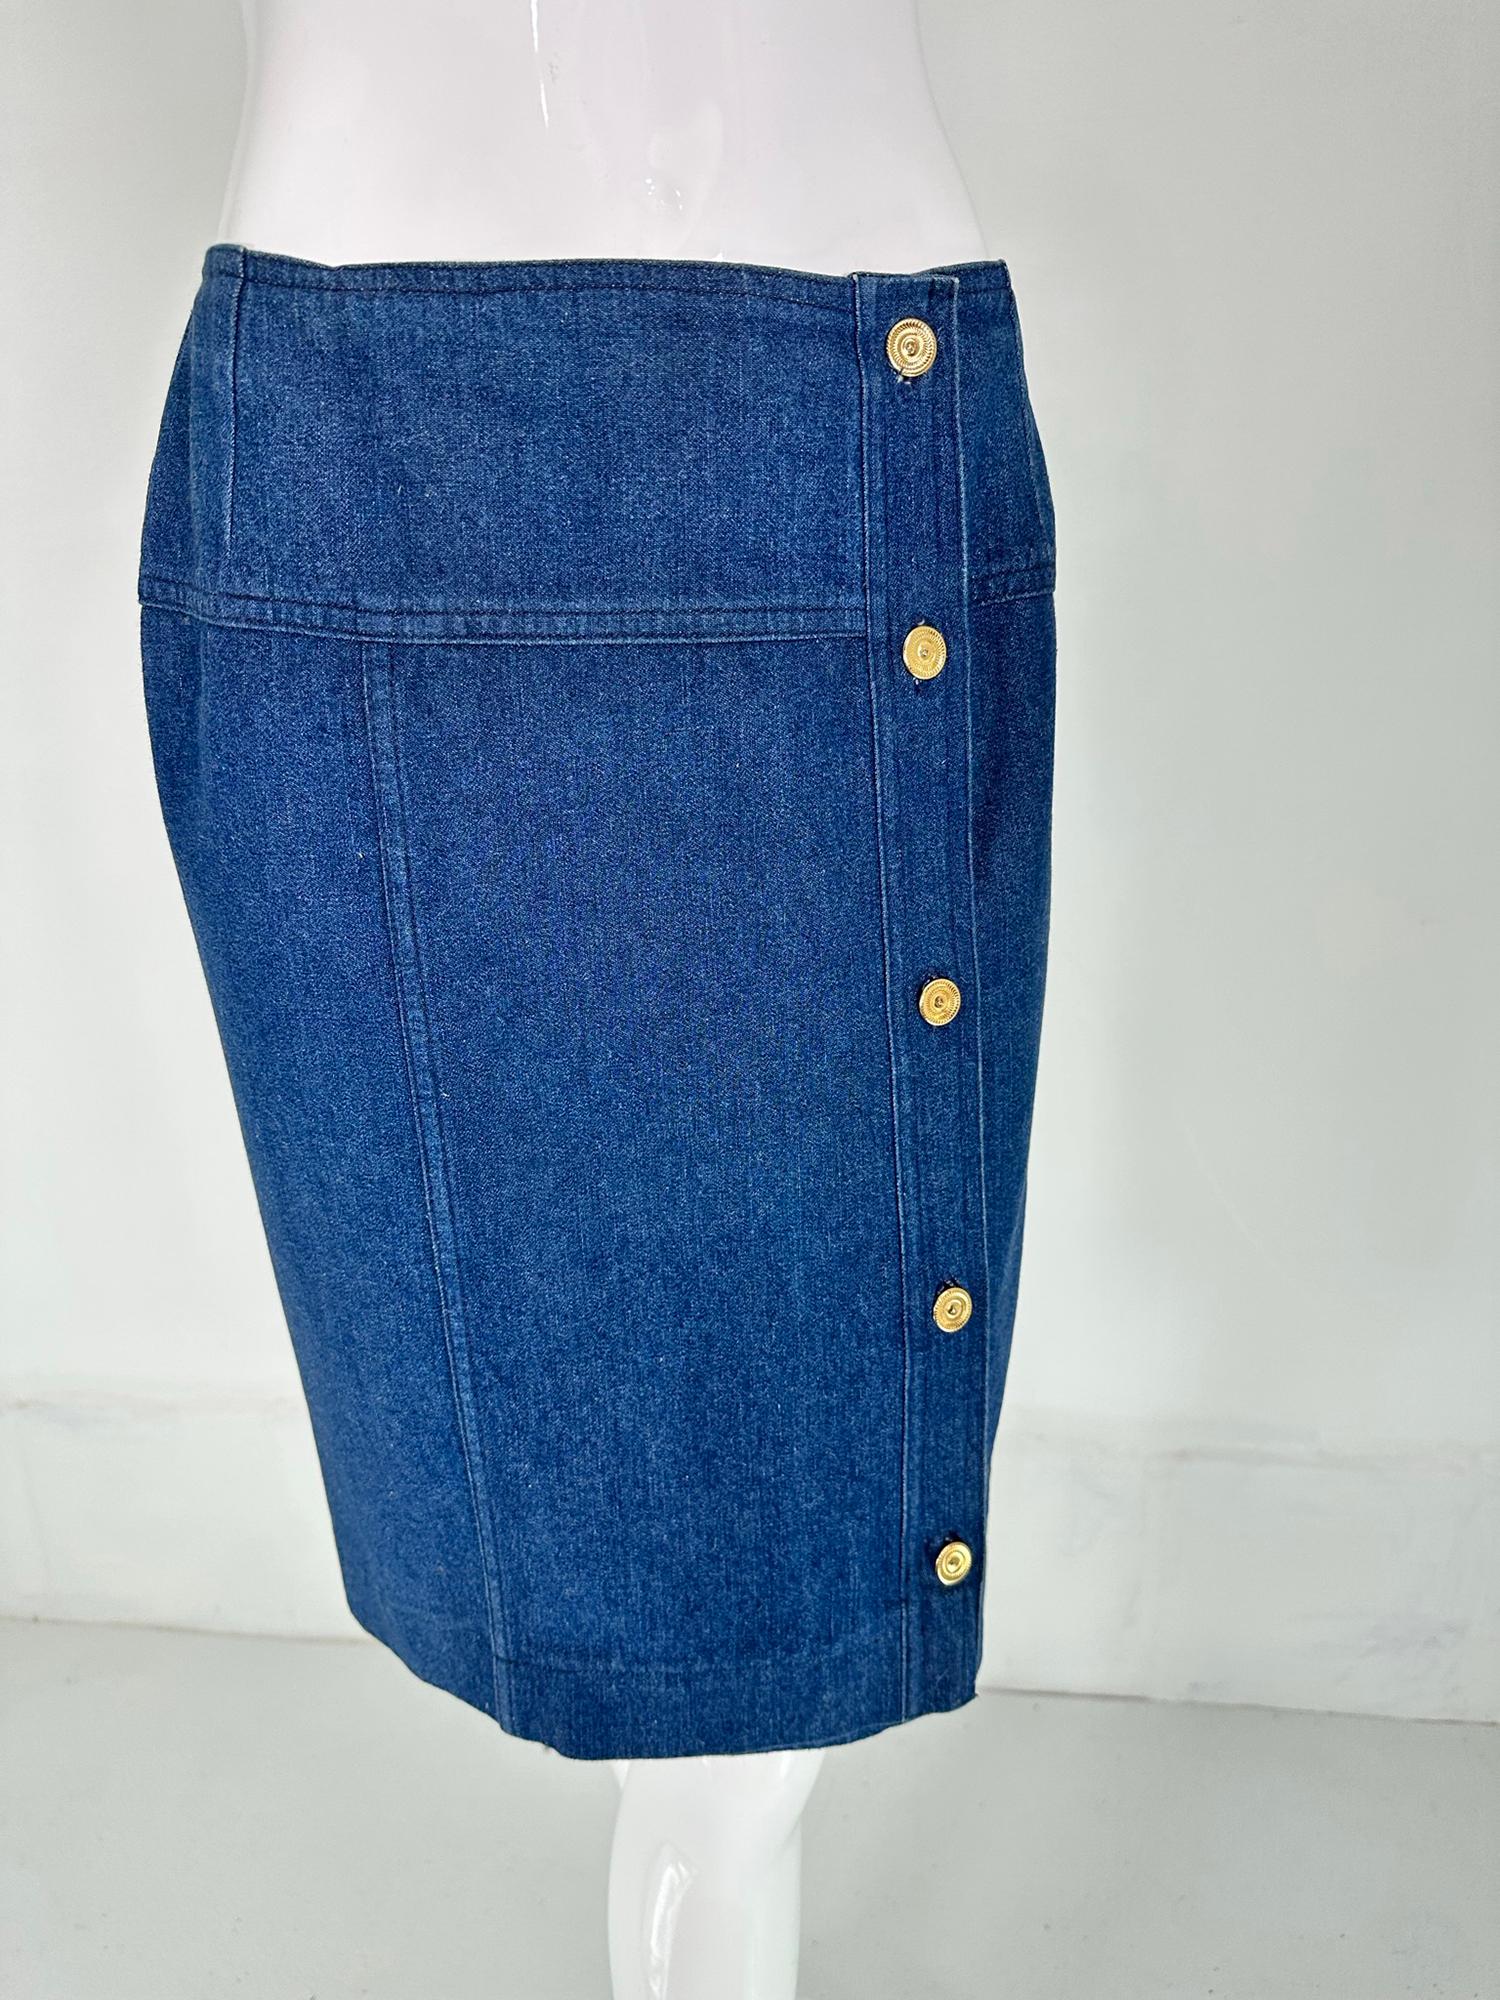 Chanel Cotton Denim Yoke Hip Side Gold Logo Button Skirt  In Good Condition For Sale In West Palm Beach, FL